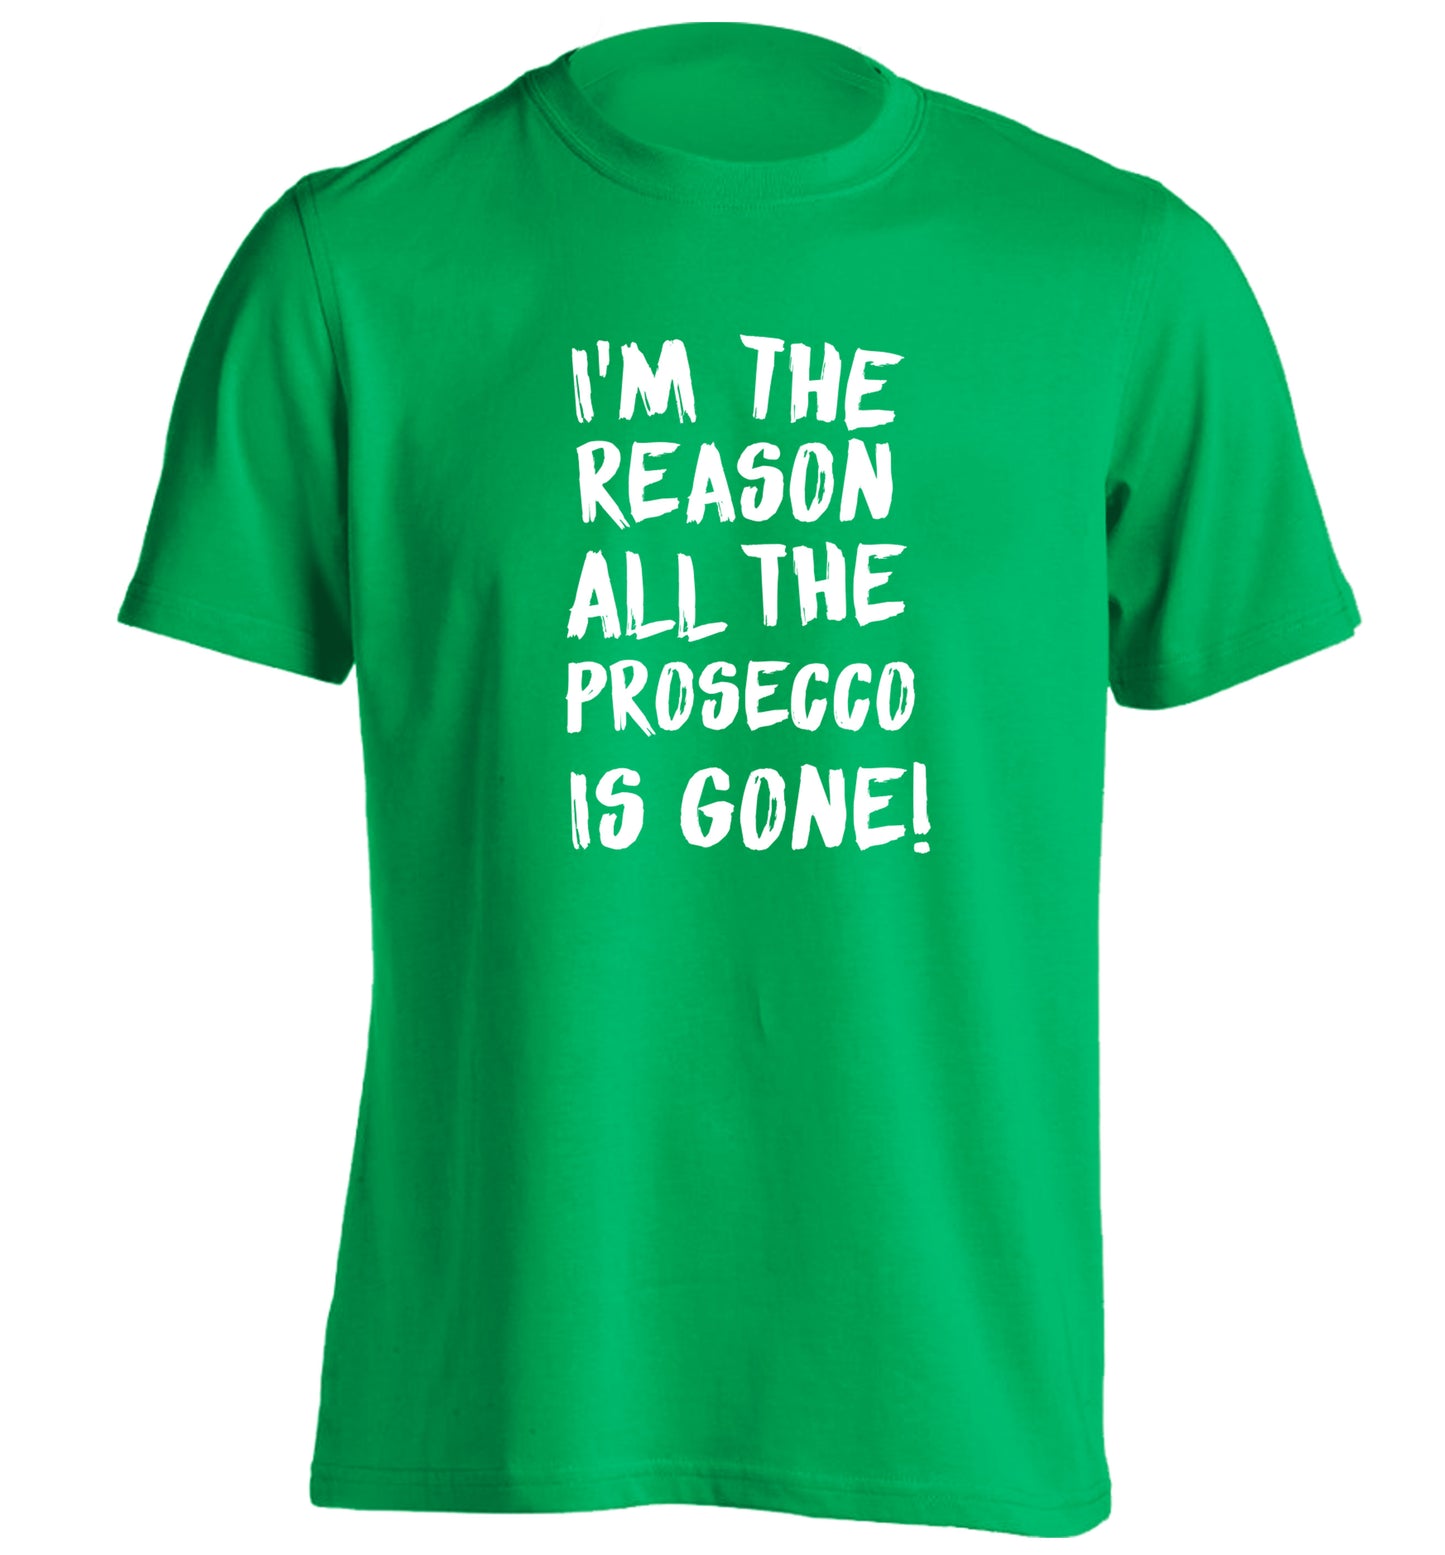 I'm the reason all the prosecco is gone adults unisex green Tshirt 2XL